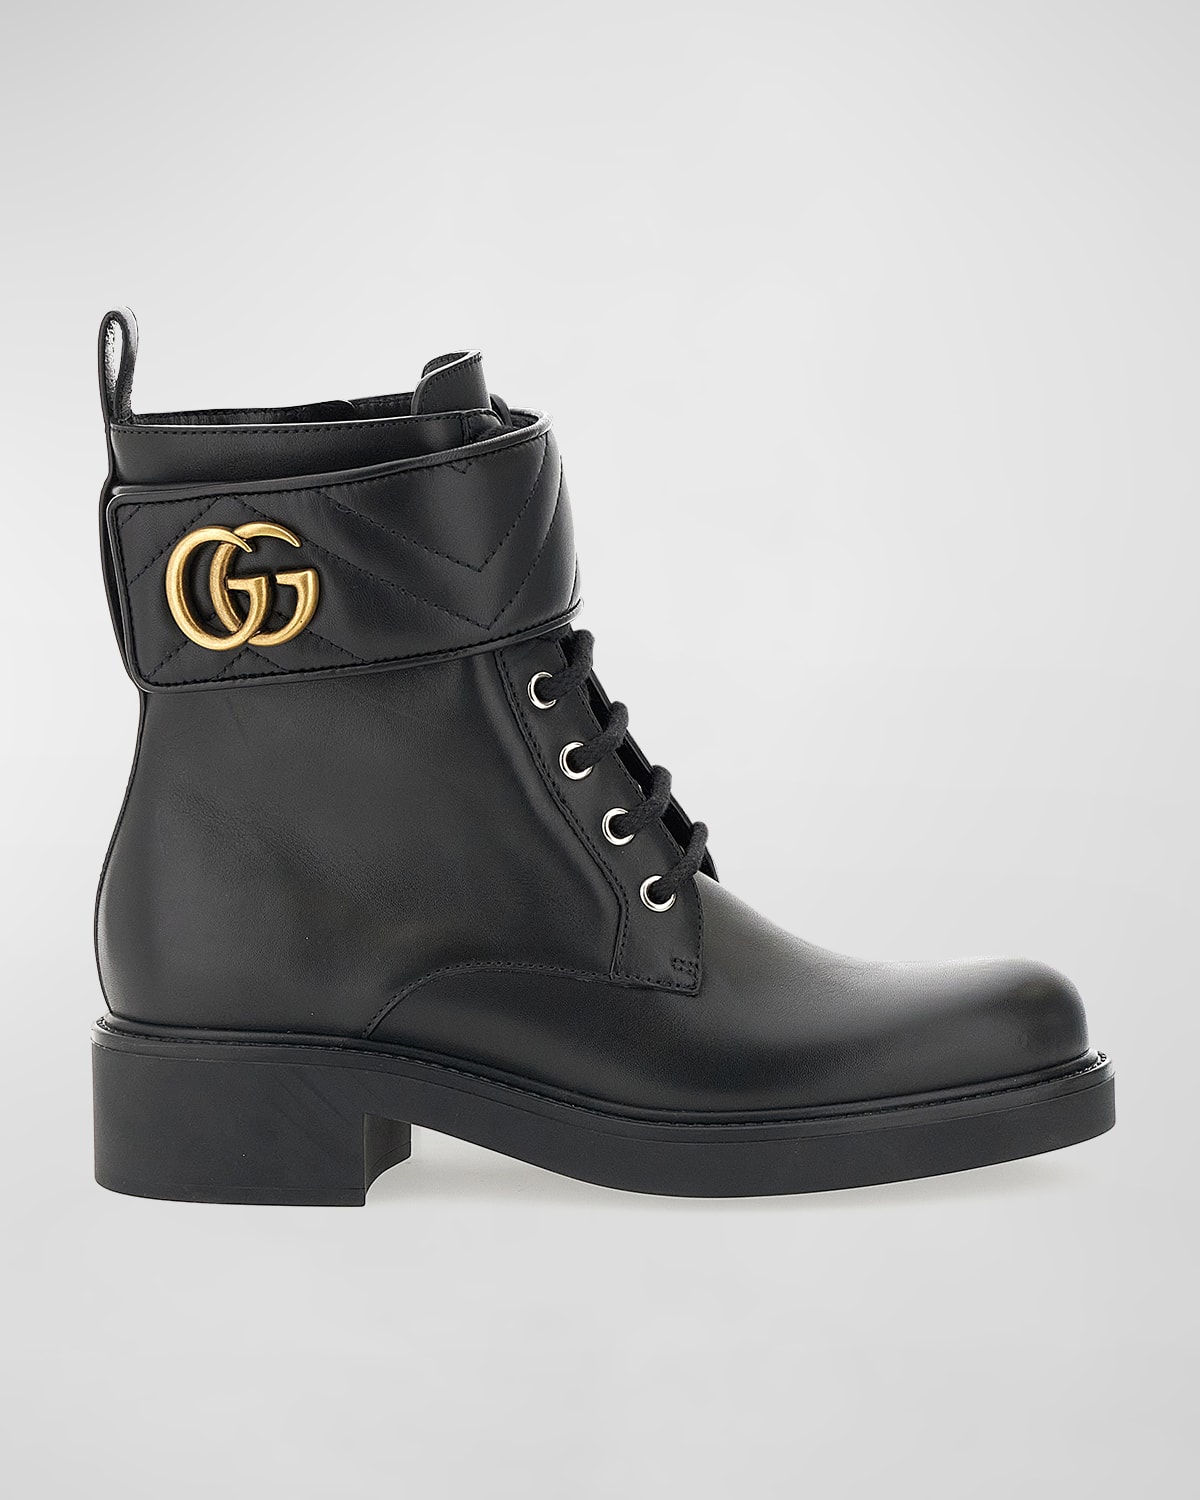 Gucci GG Logo Quilted Combat Boots | Neiman Marcus